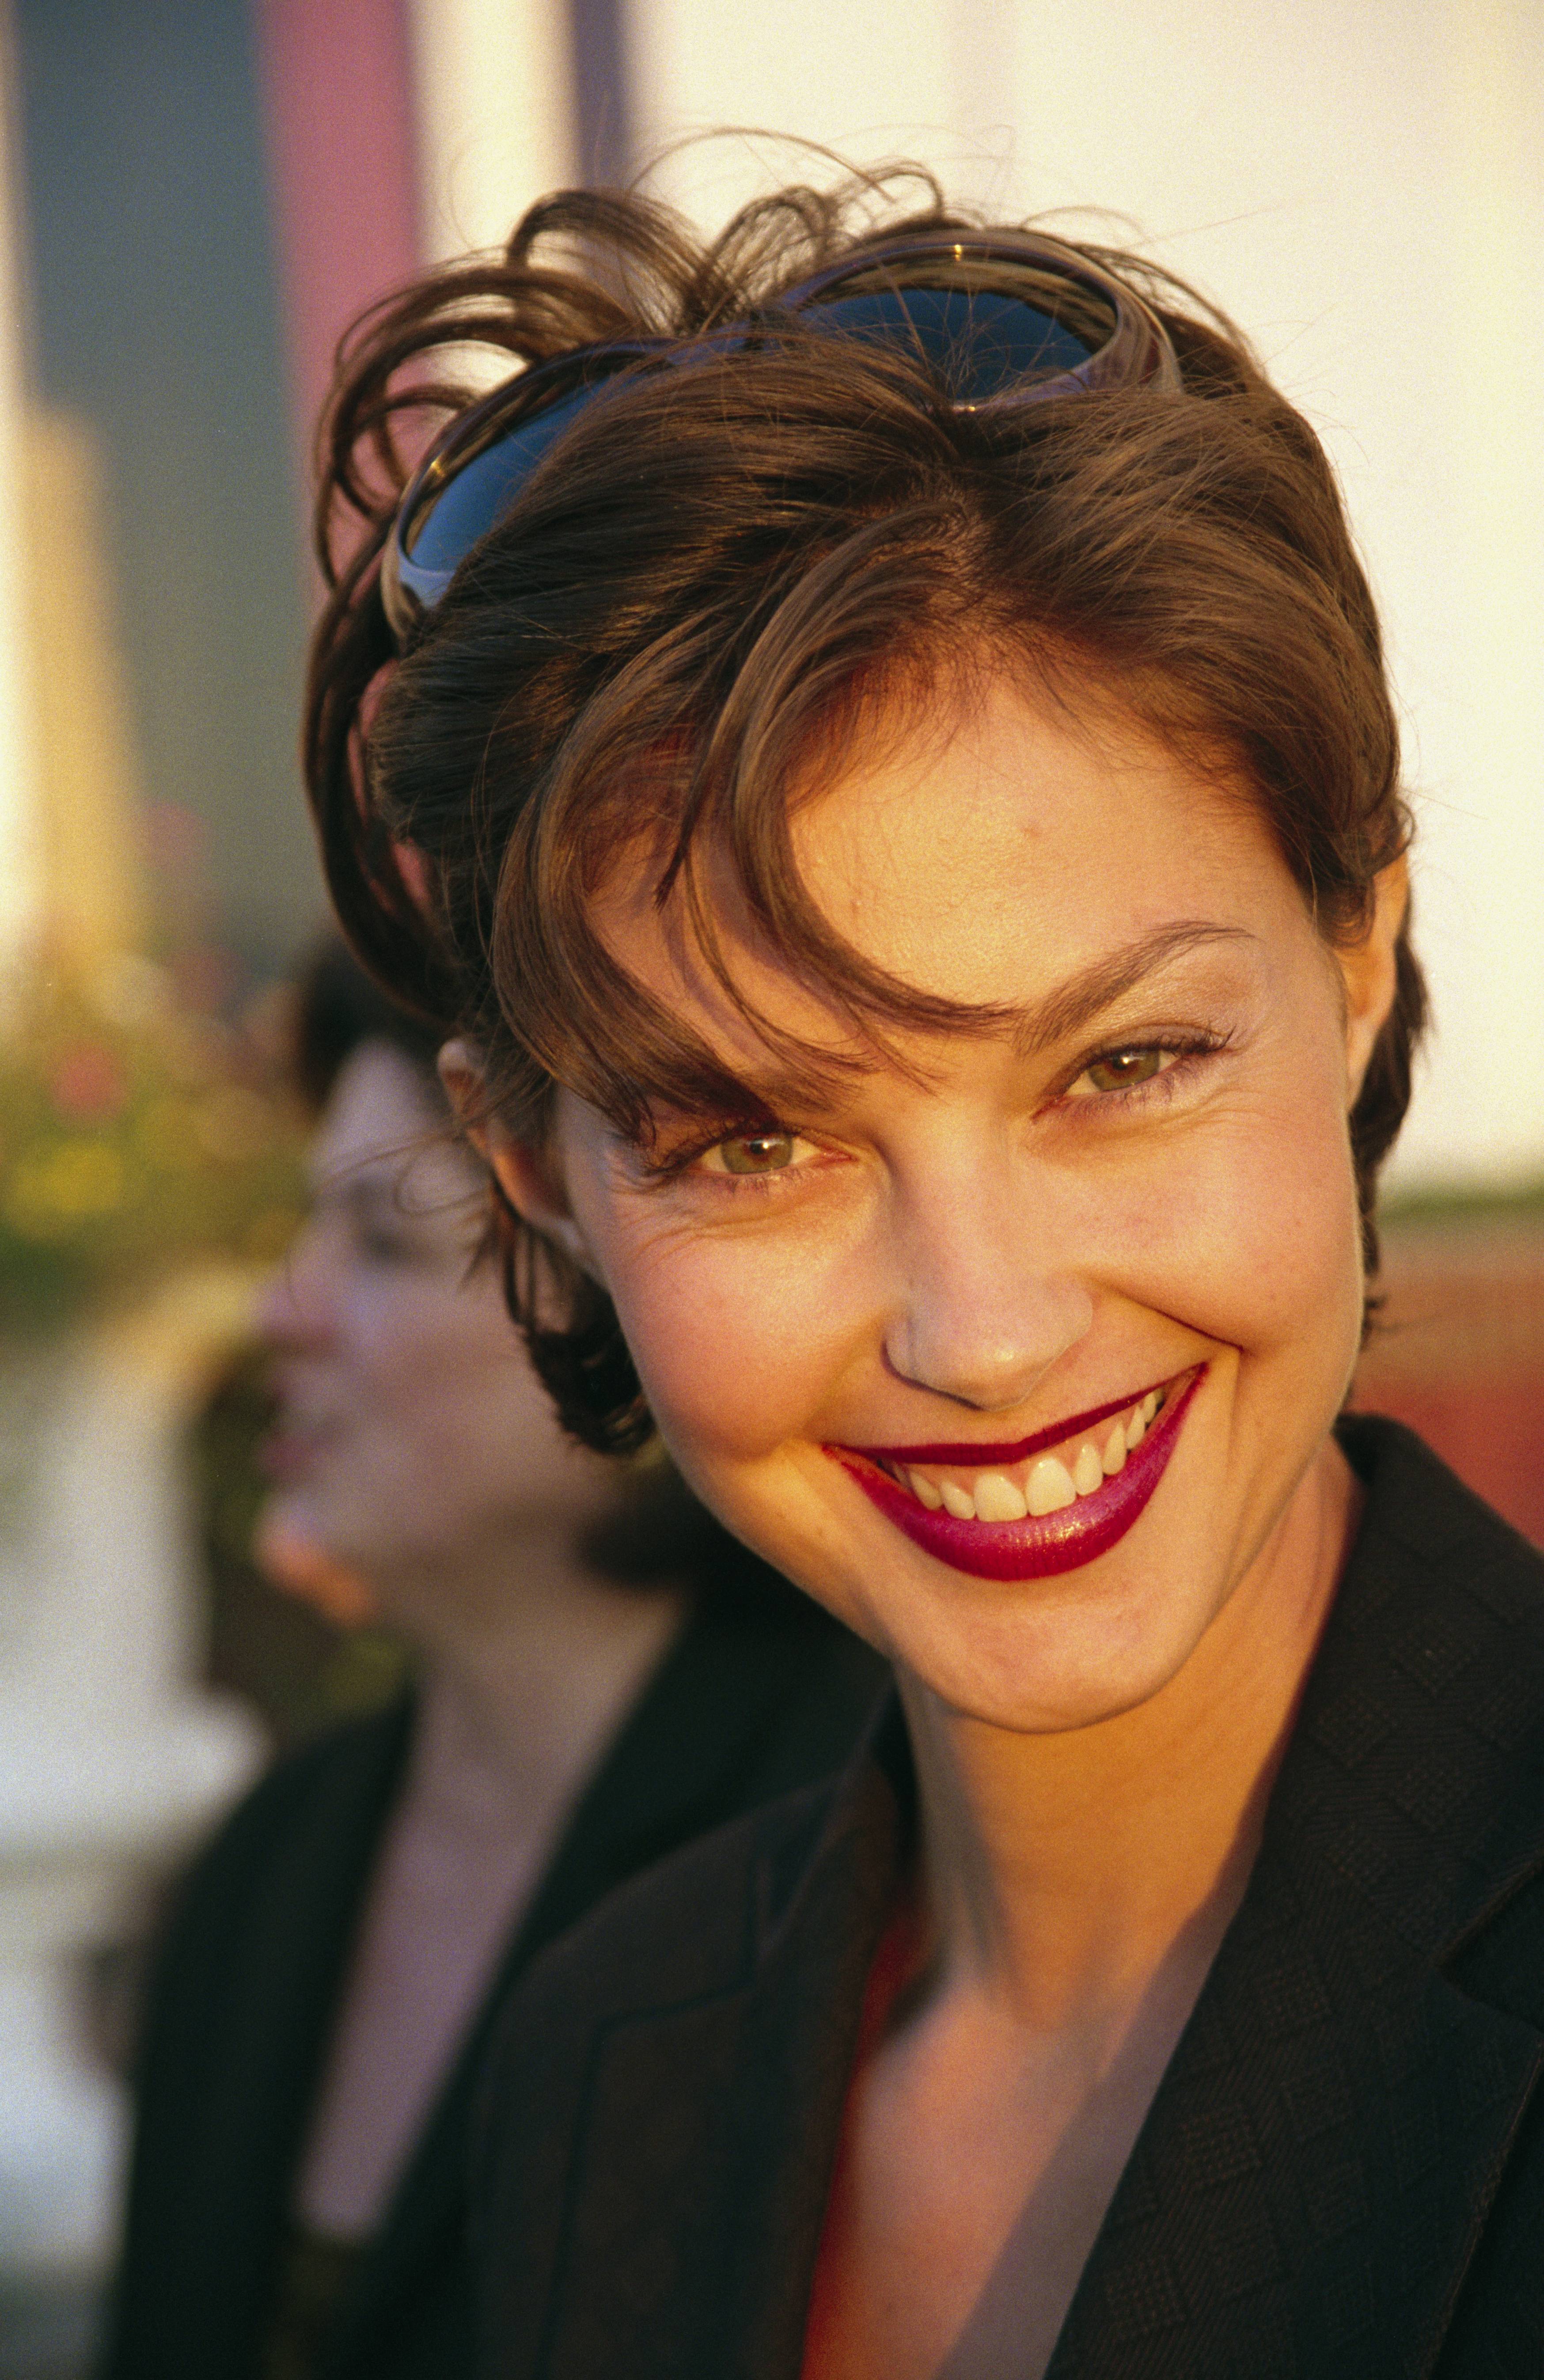 Ashley Judd at Deauville Film Festival on September 1, 1997 | Source: Getty Images